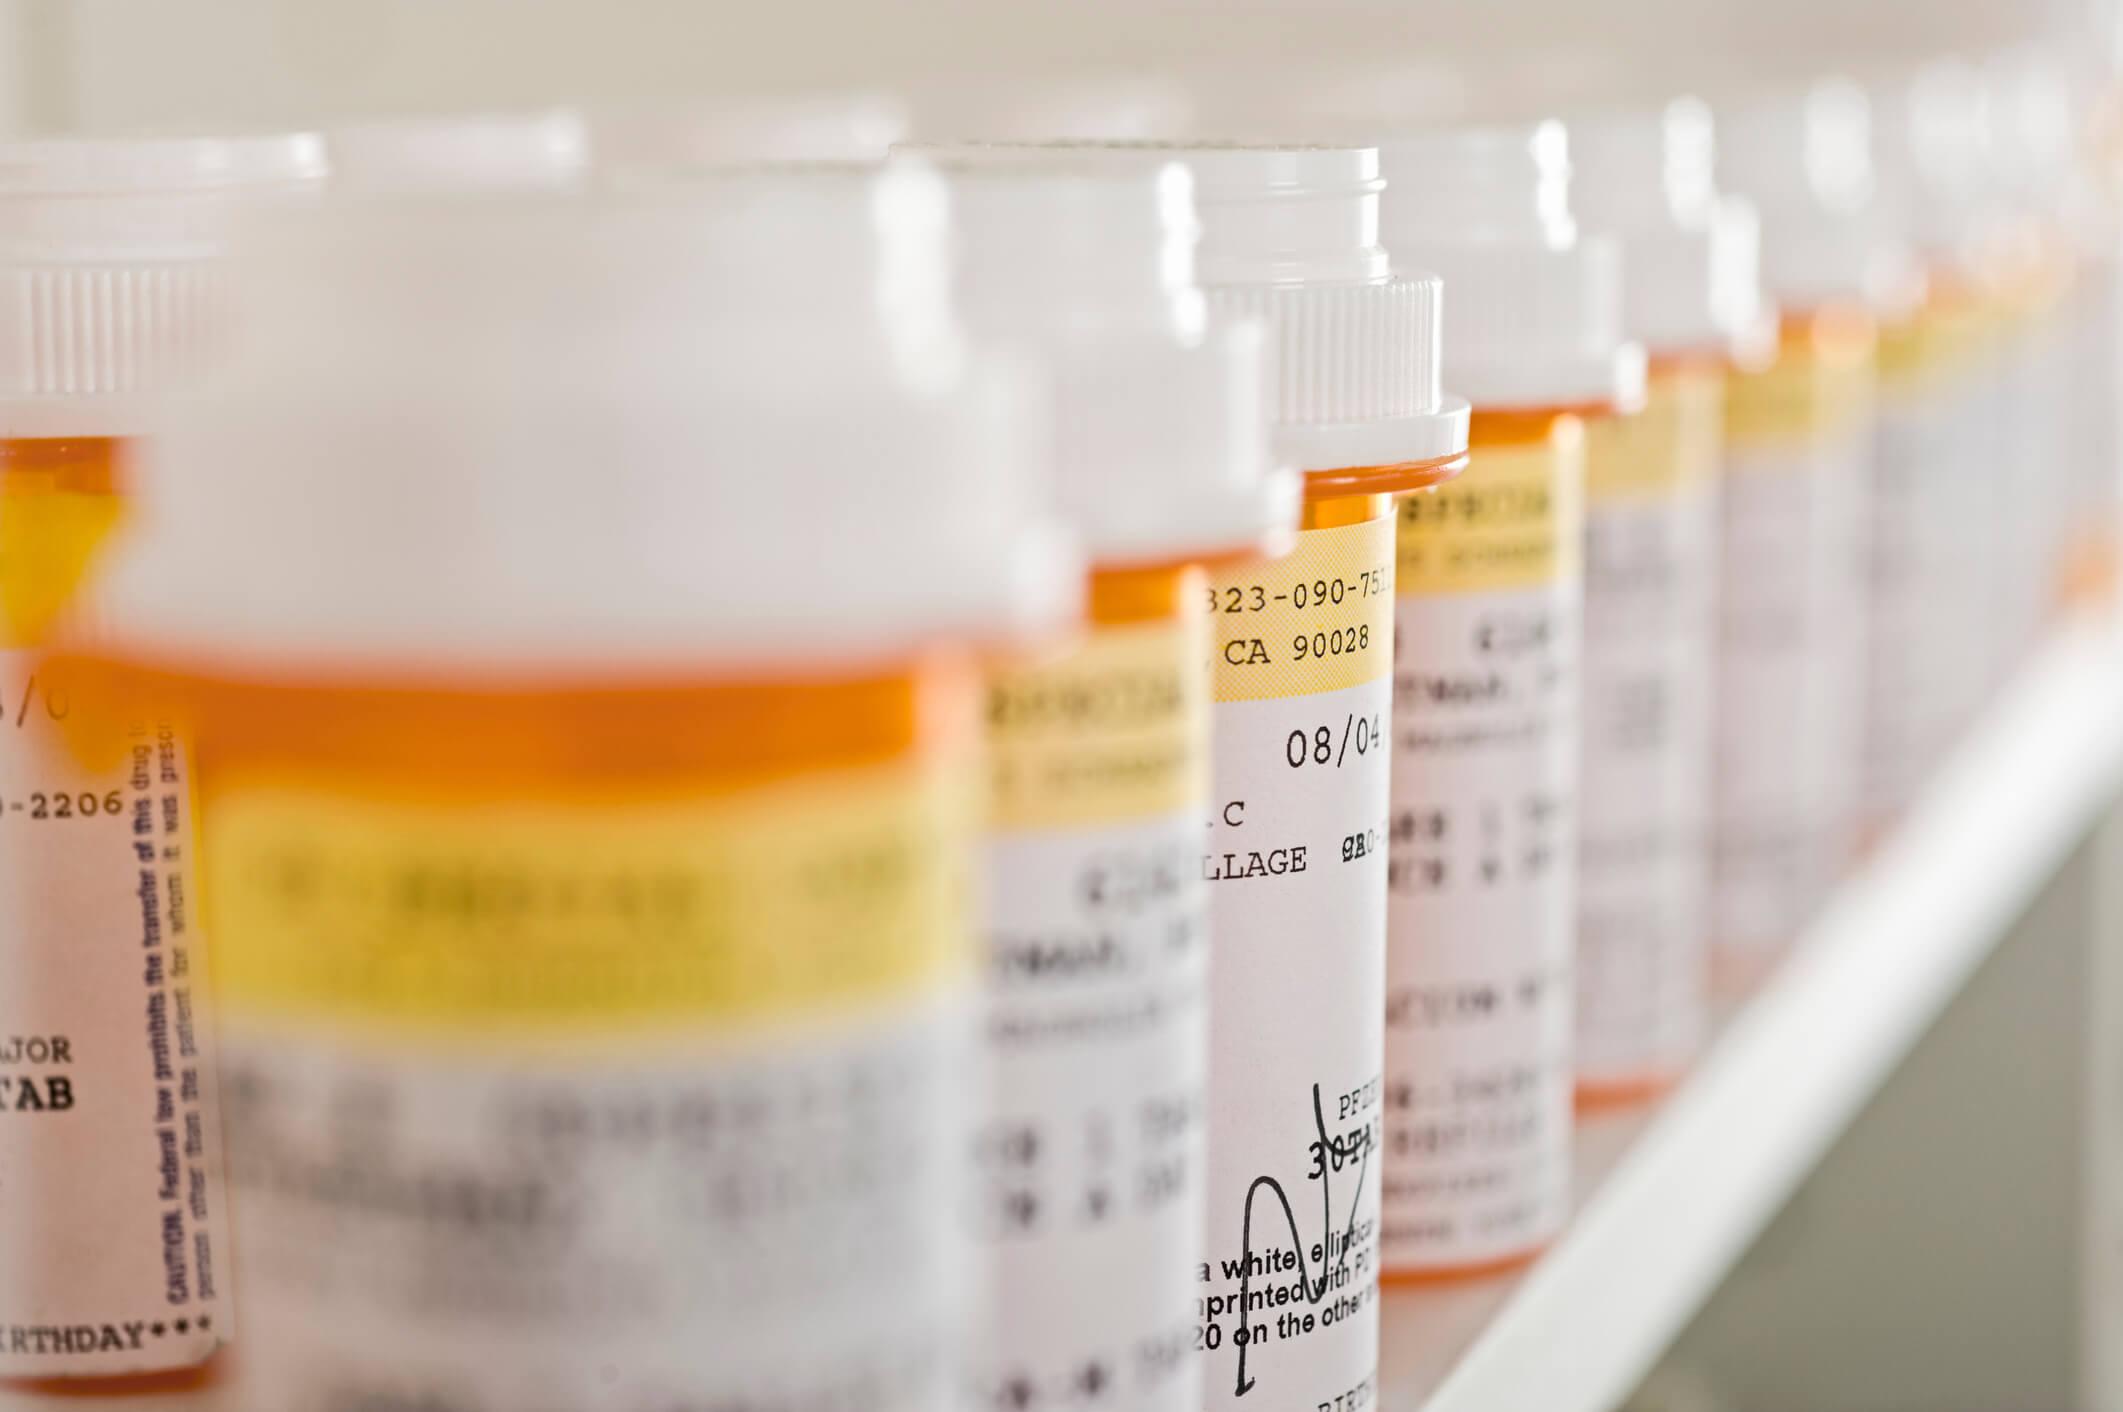 close up view of medication bottles